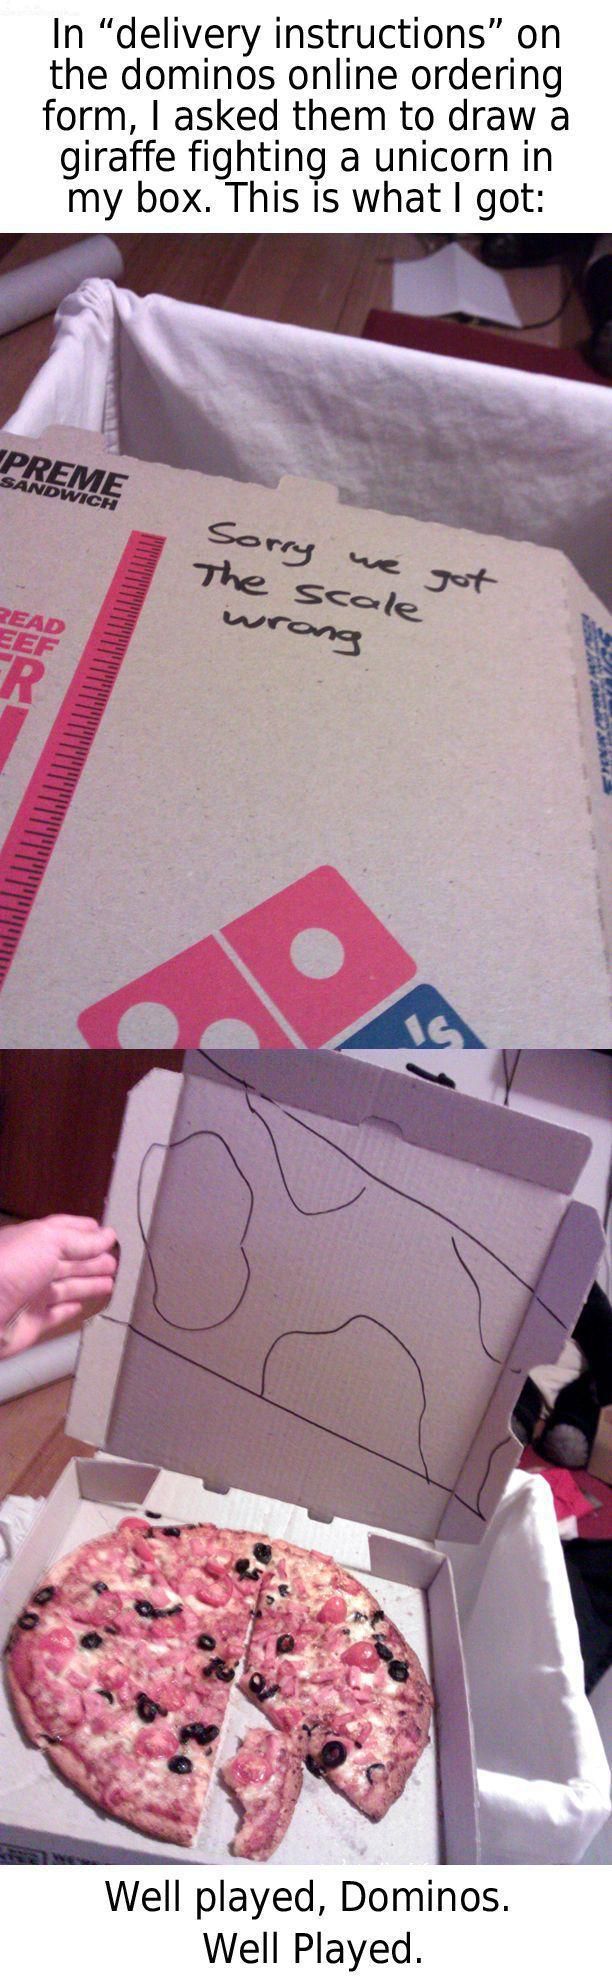 pizza box giraffe - In "delivery instructions" on the dominos online ordering form, I asked them to draw a giraffe fighting a unicorn in my box. This is what I got Iprem Sandwich Sorry The we got scale wrong Read Eef Well played, Dominos. Well Played.